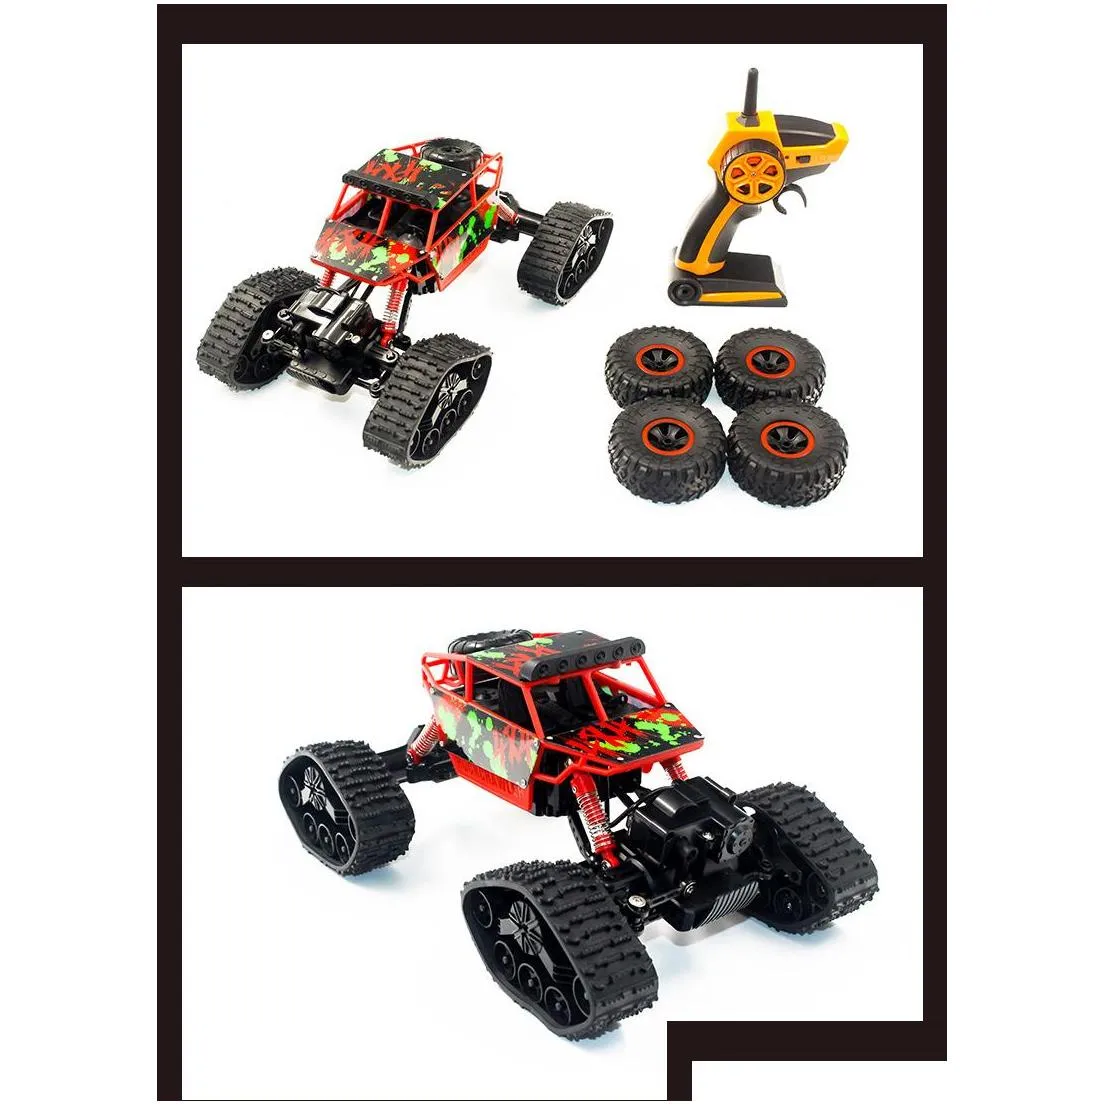 yy 2.4g rc crawlertype snow climbing car 118 monster truck suv with snow tire 4 spare tires ample power xmas kid birthday gift